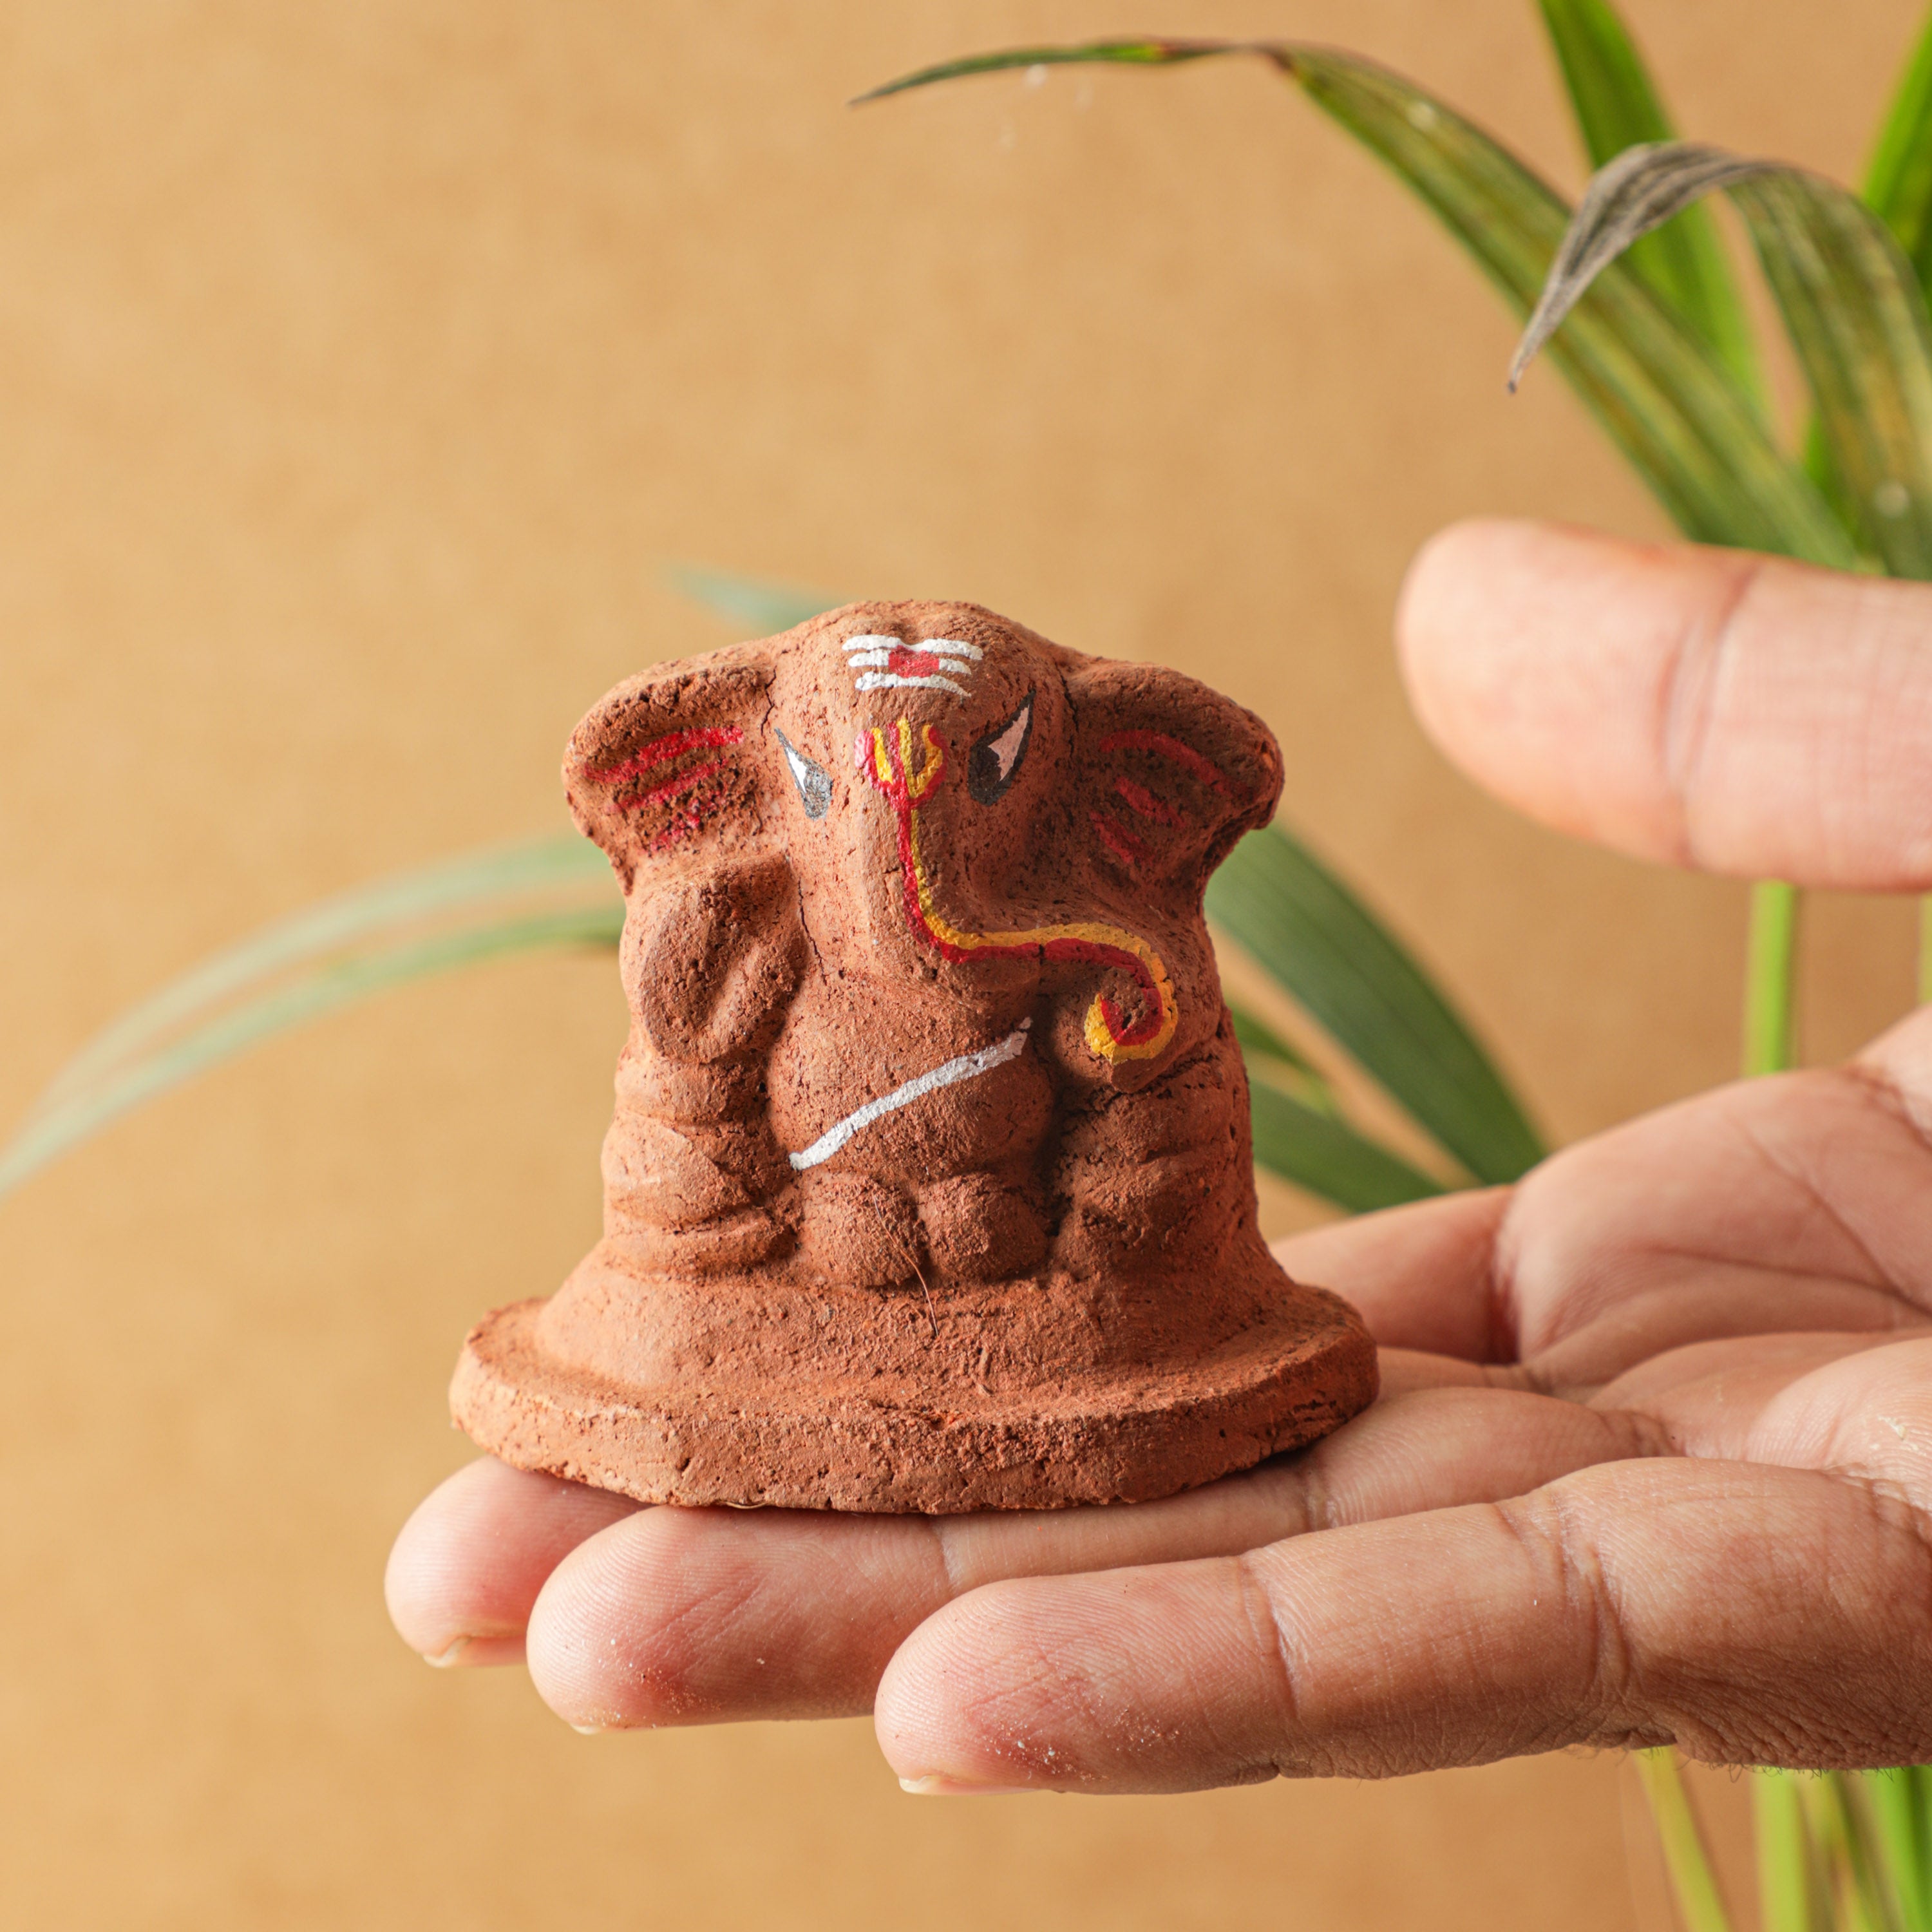 Holding the clay ganesha in hand by an artist